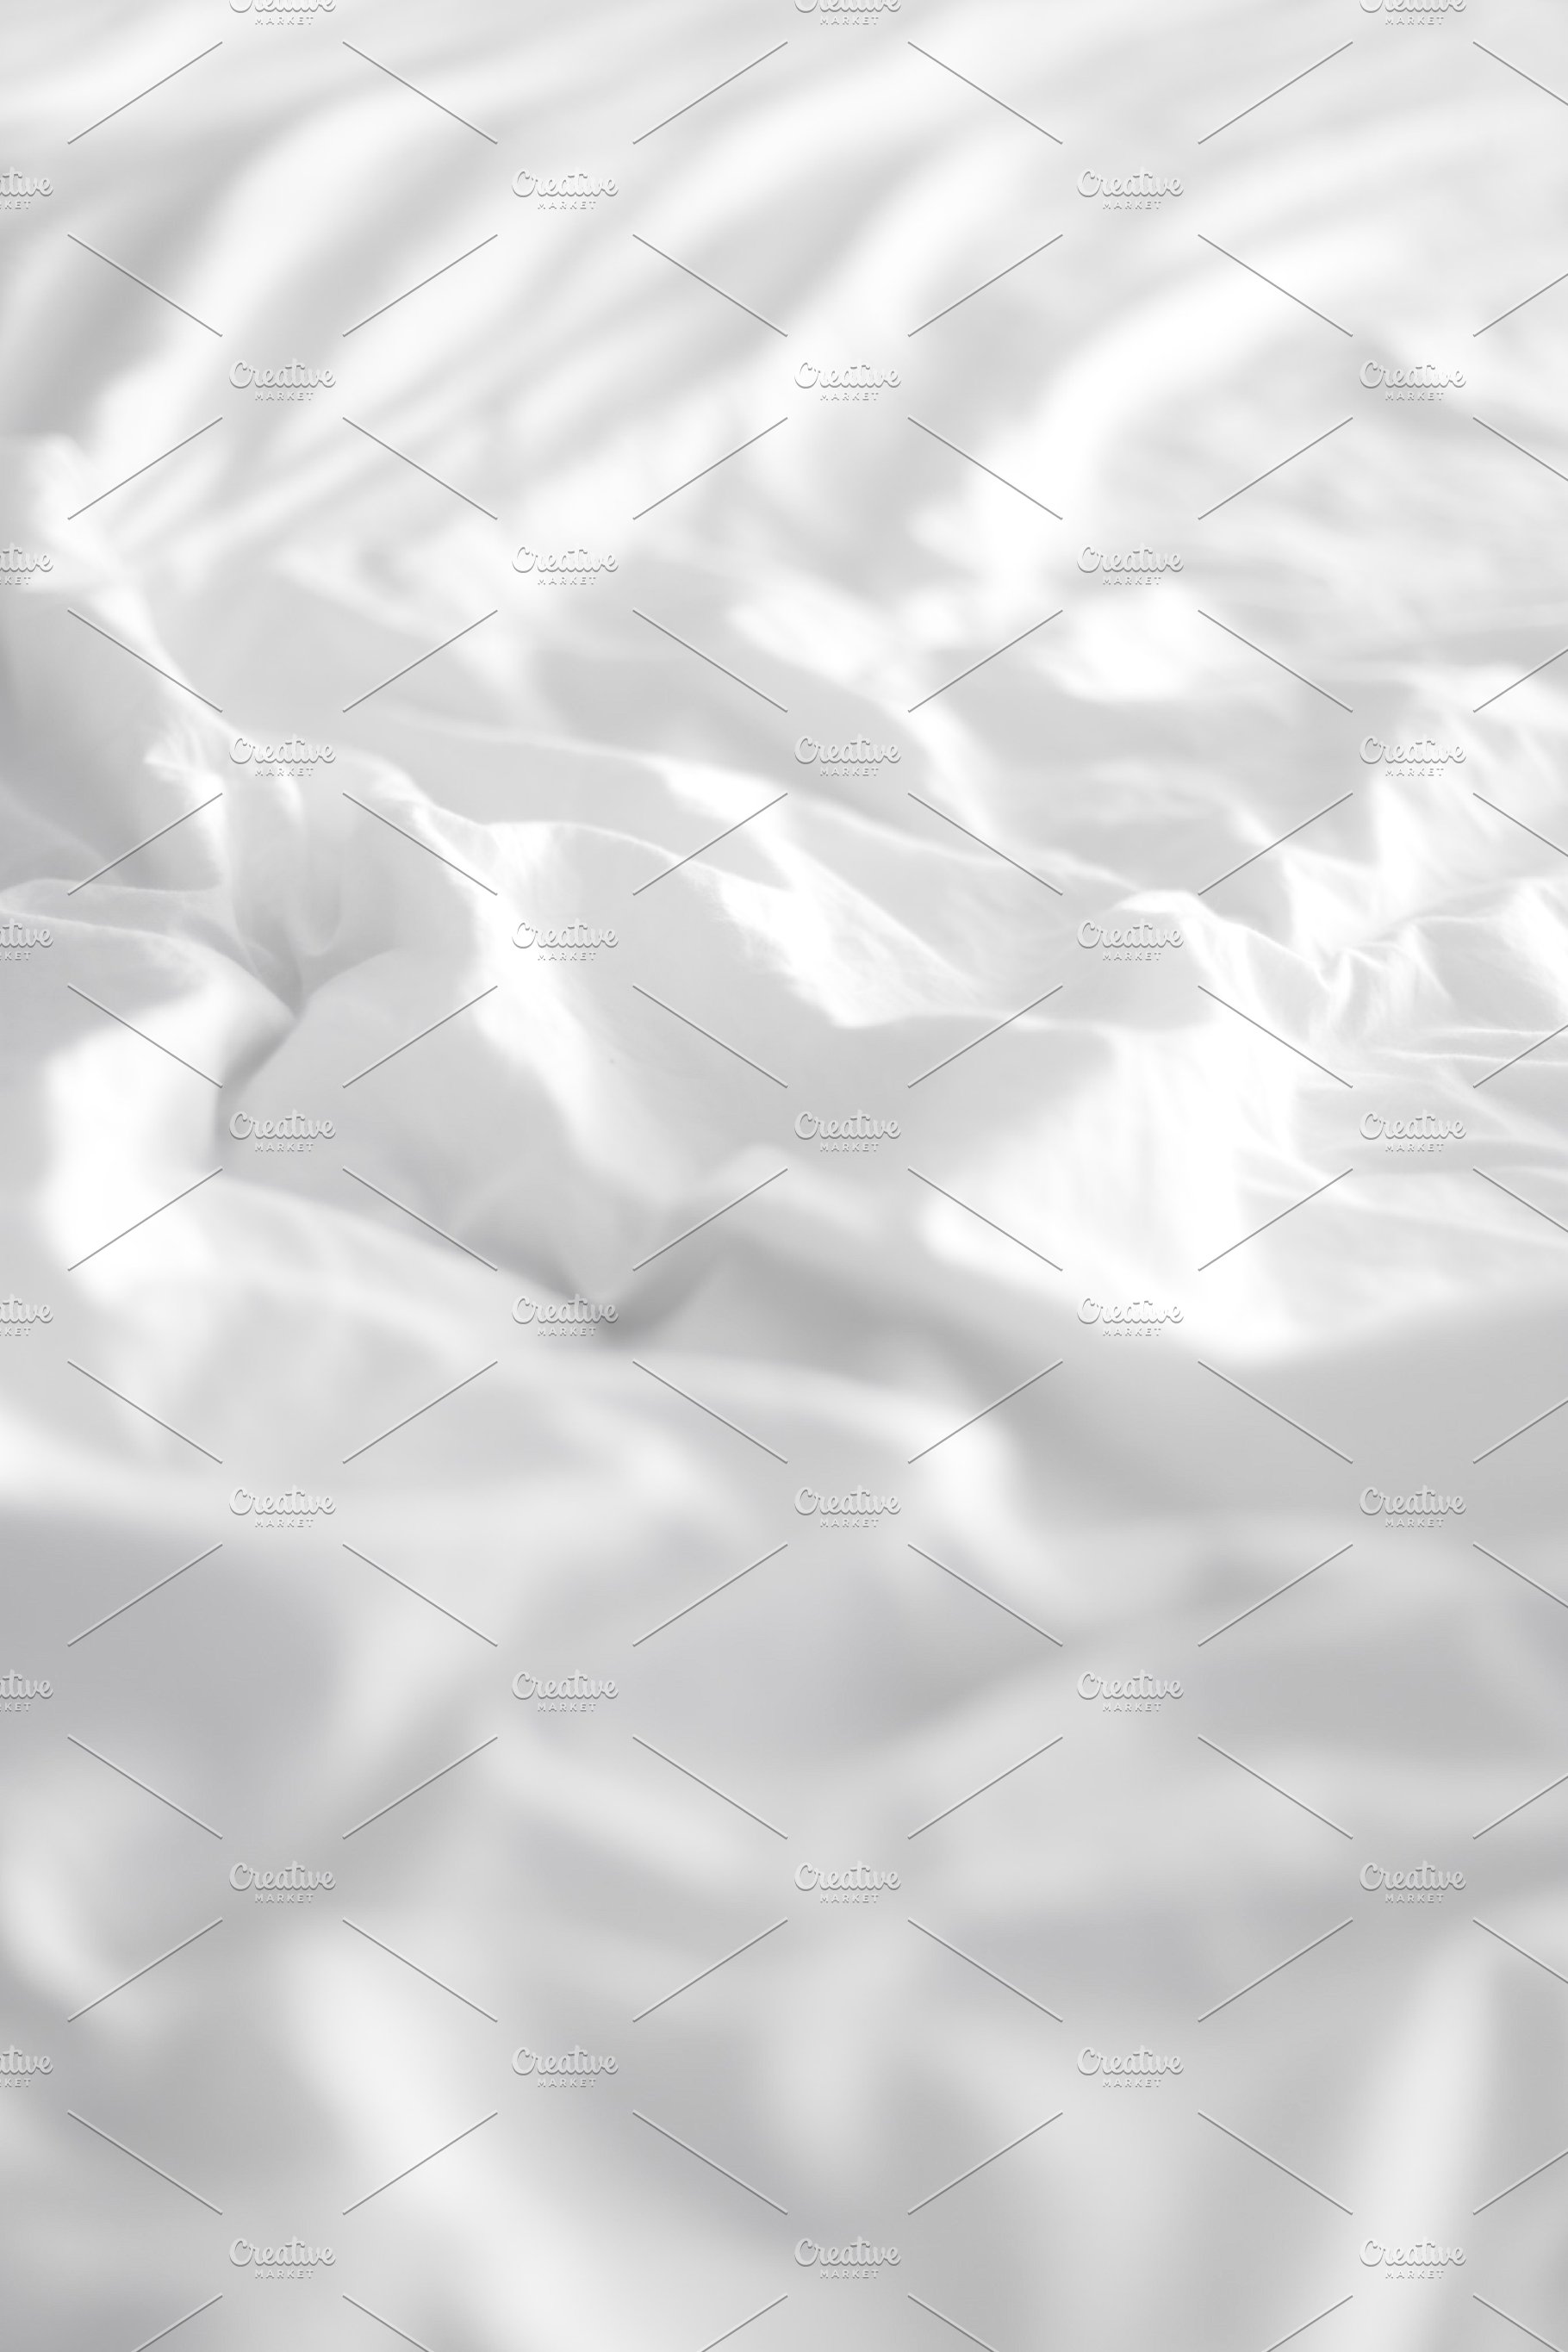 White Bed Sheets Background High Quality Abstract Stock Photos